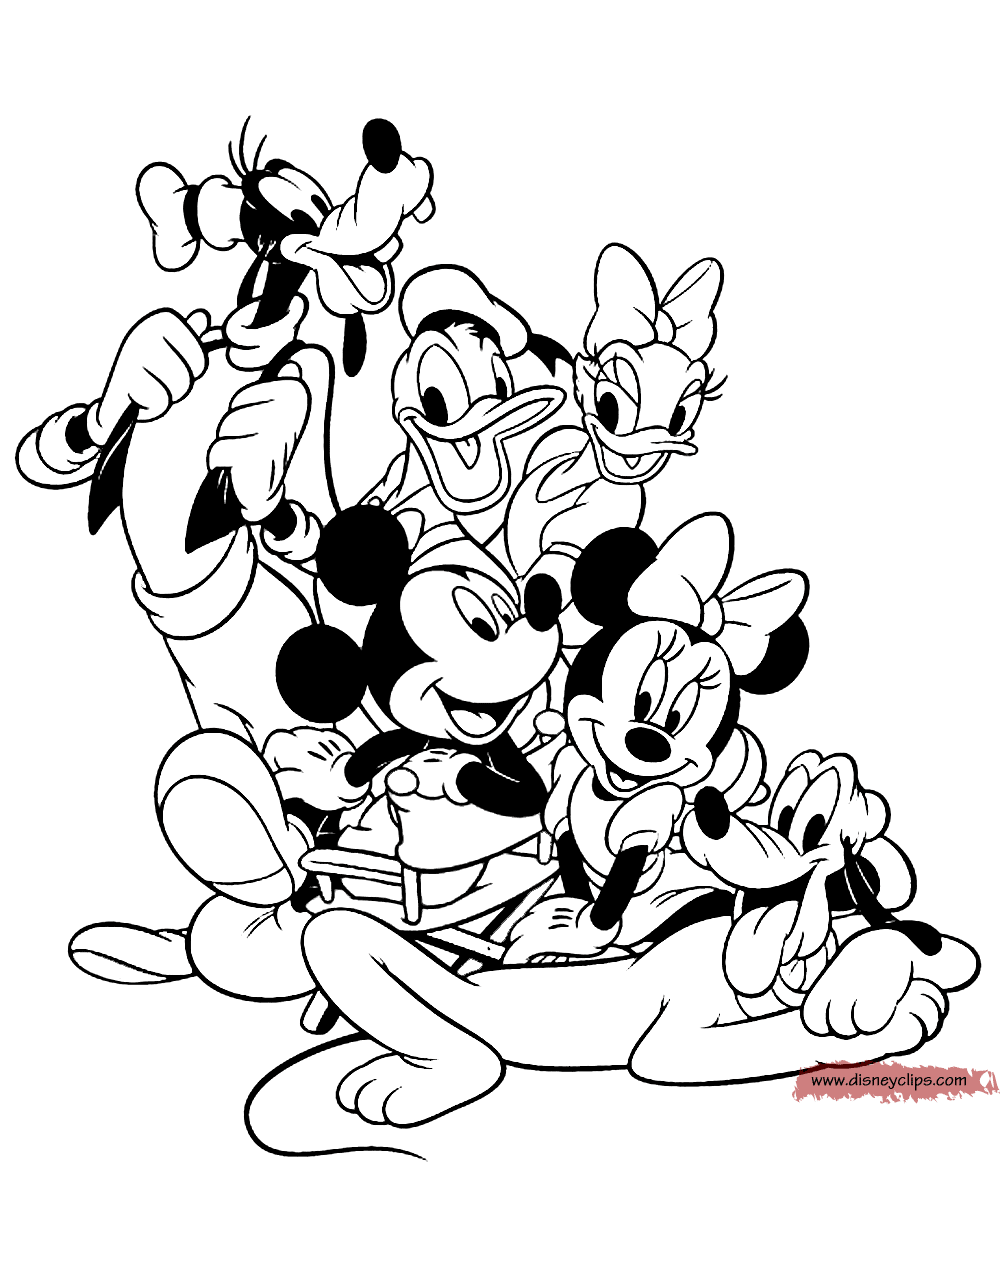 Mickey Mouse & Friends Coloring Pages (3) | Disneyclips.com